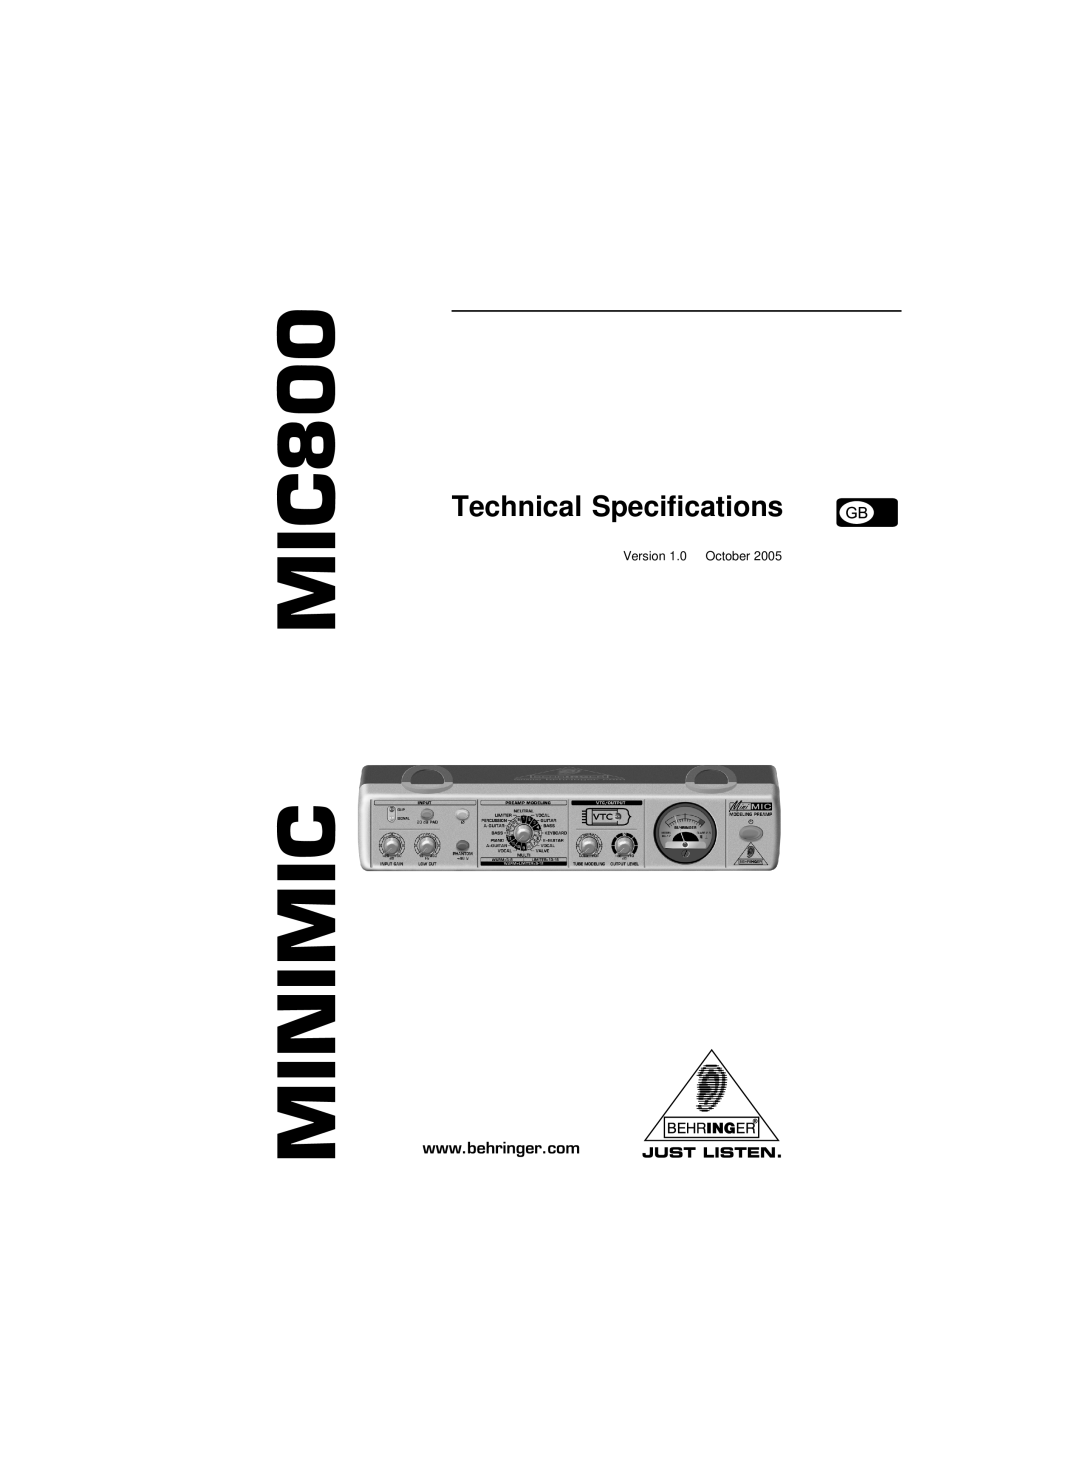 Behringer technical specifications MINIMIC MIC800, Technical Specifications 